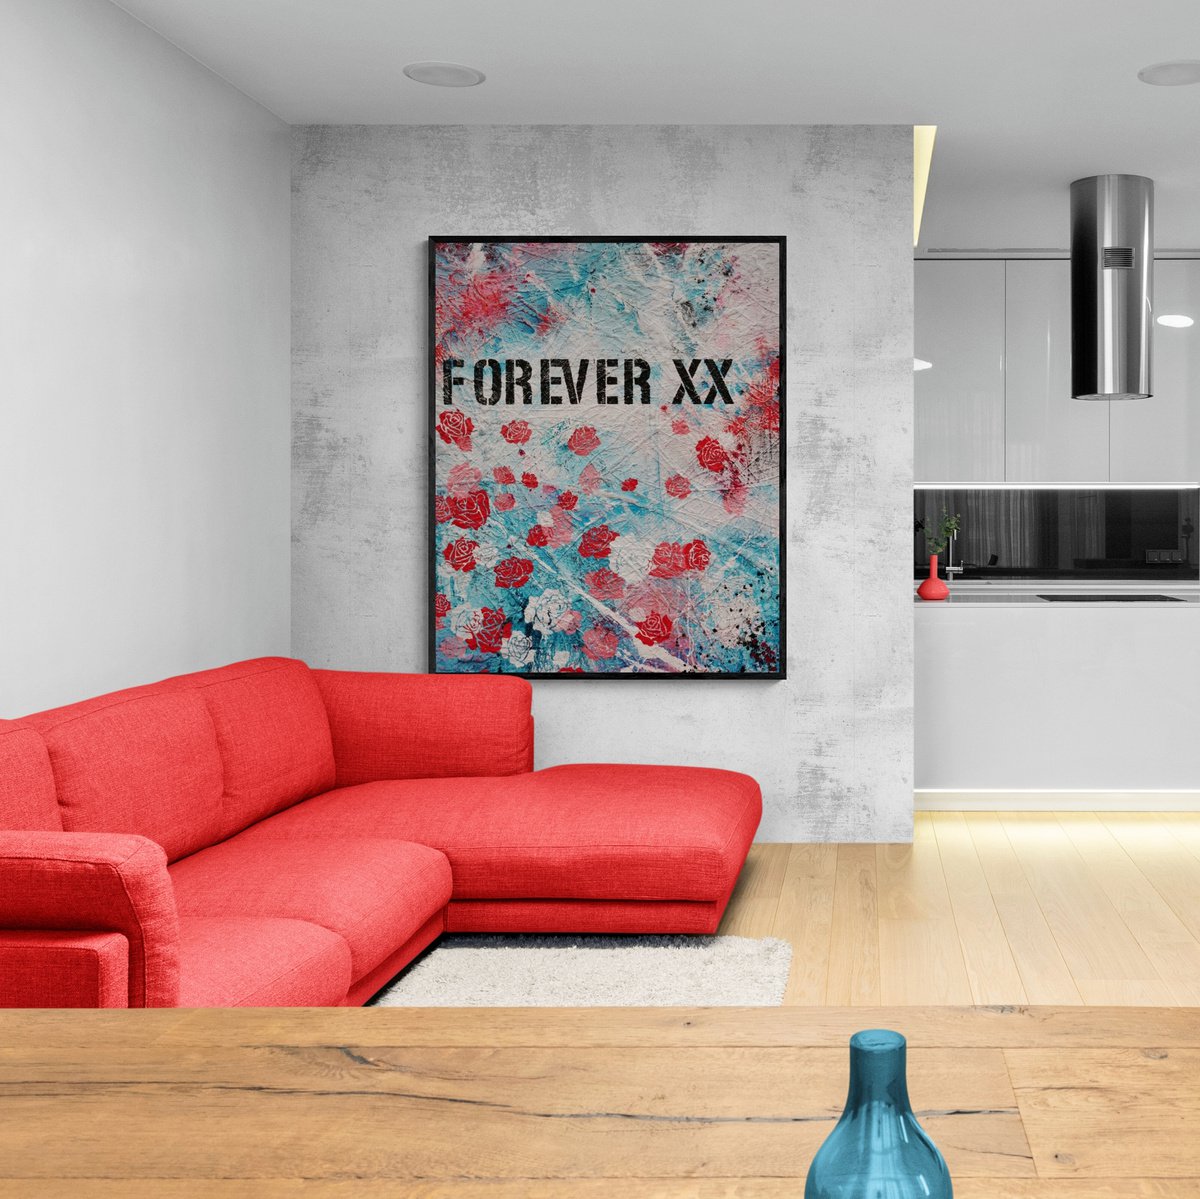 Forever and Ever 120cm x 150cm Forever XX Textured Urban Pop Art by Franko